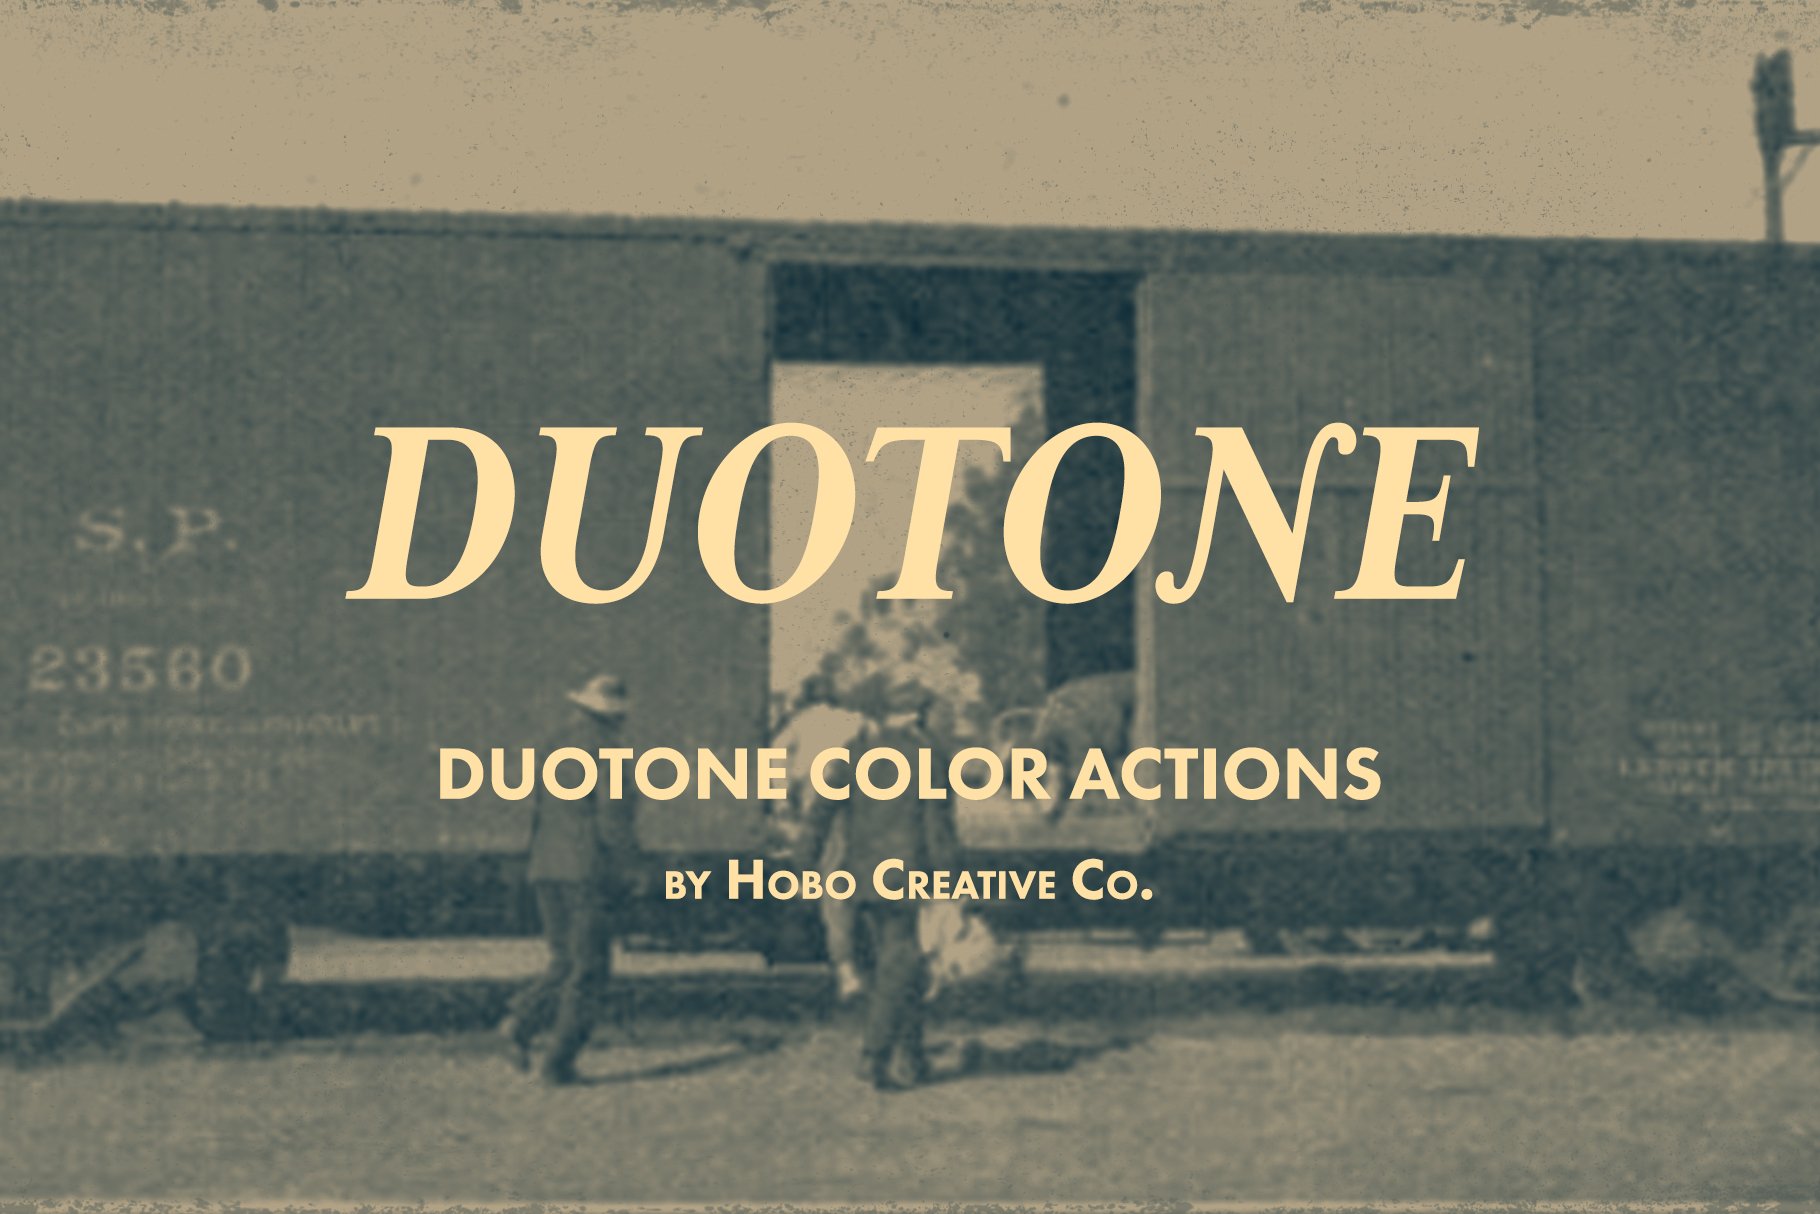 Duotone Color Actionscover image.